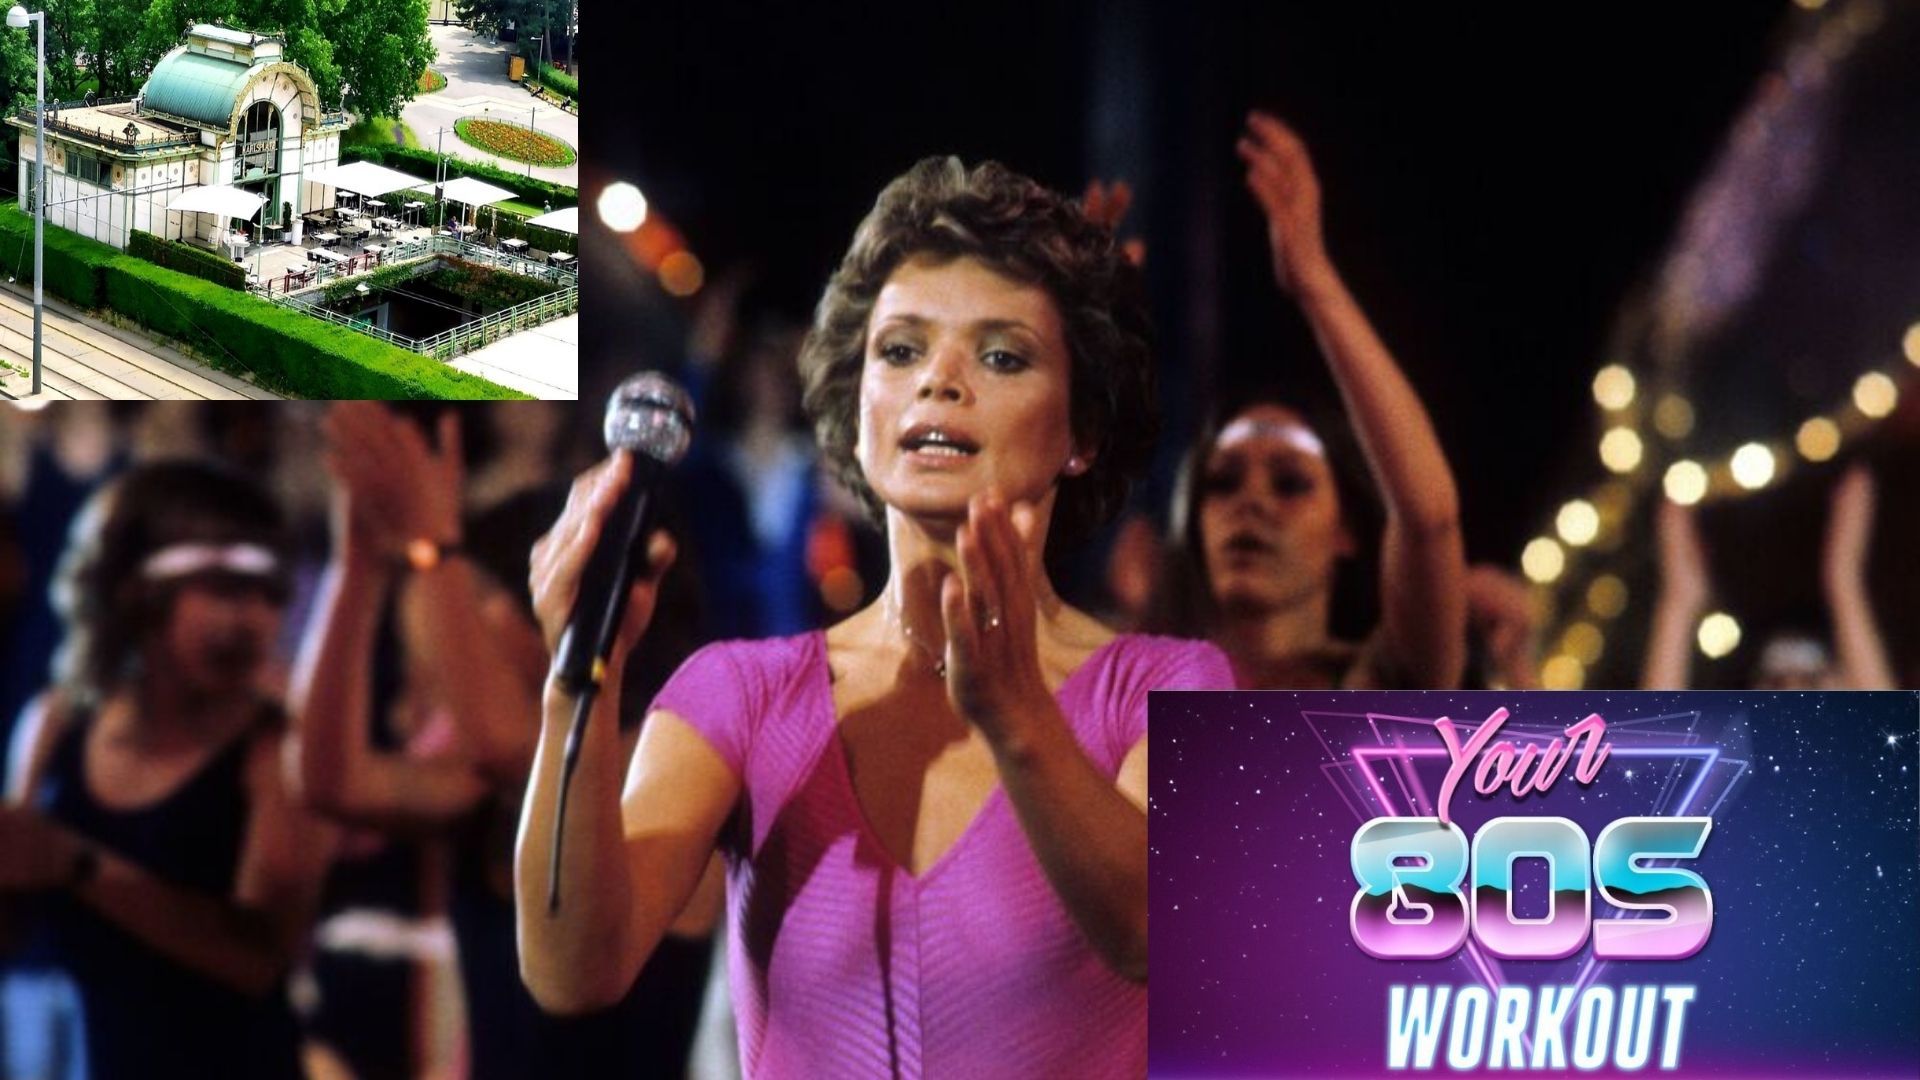 Your 80s Workout – Party in Wien  @Club U